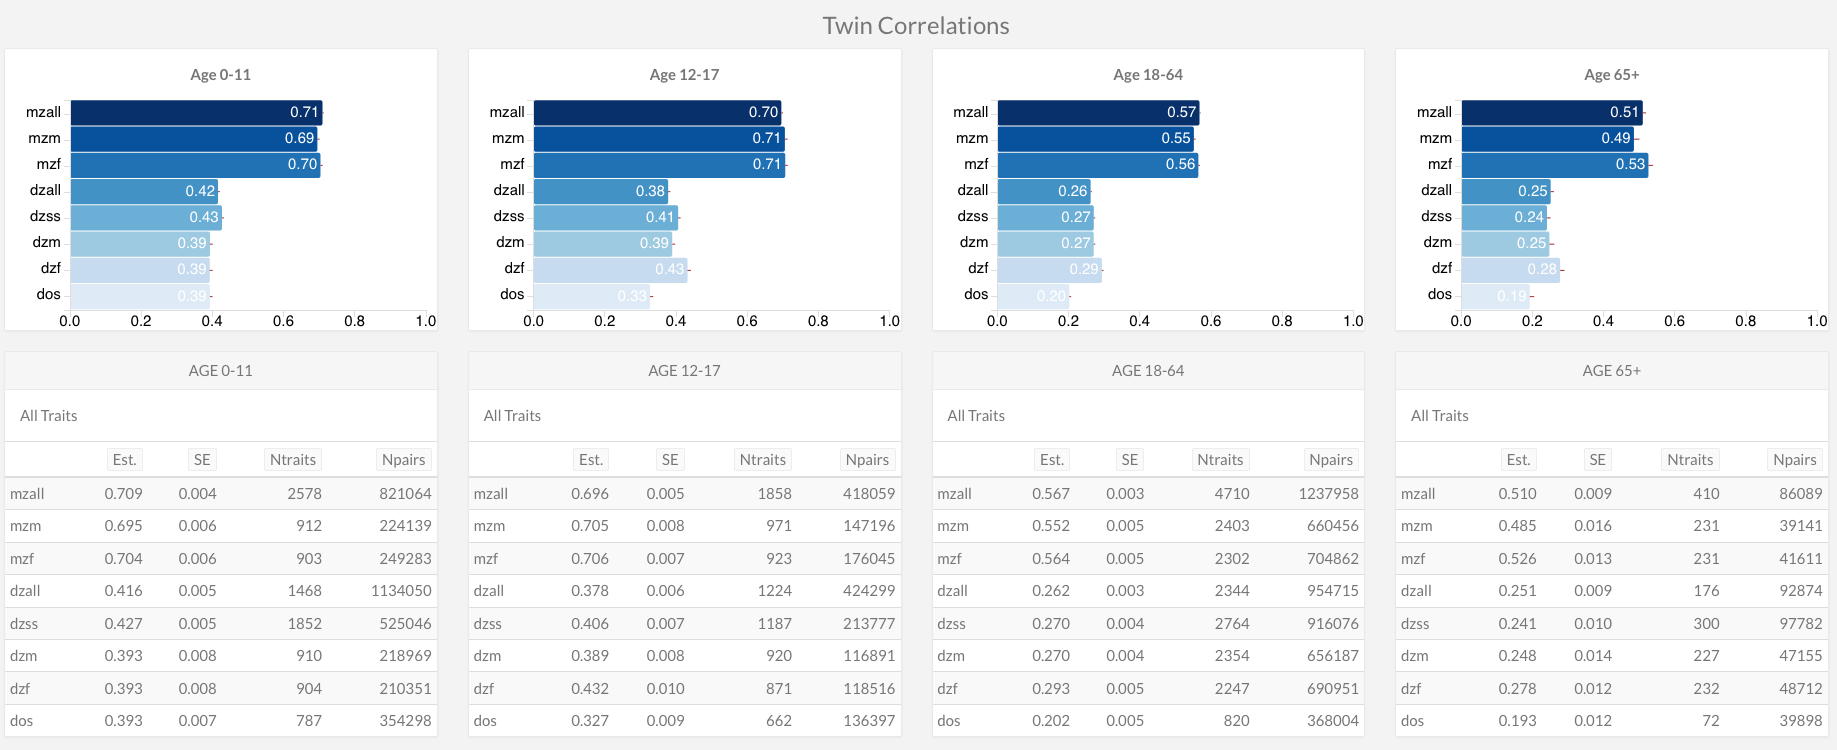 twin corrs by age group